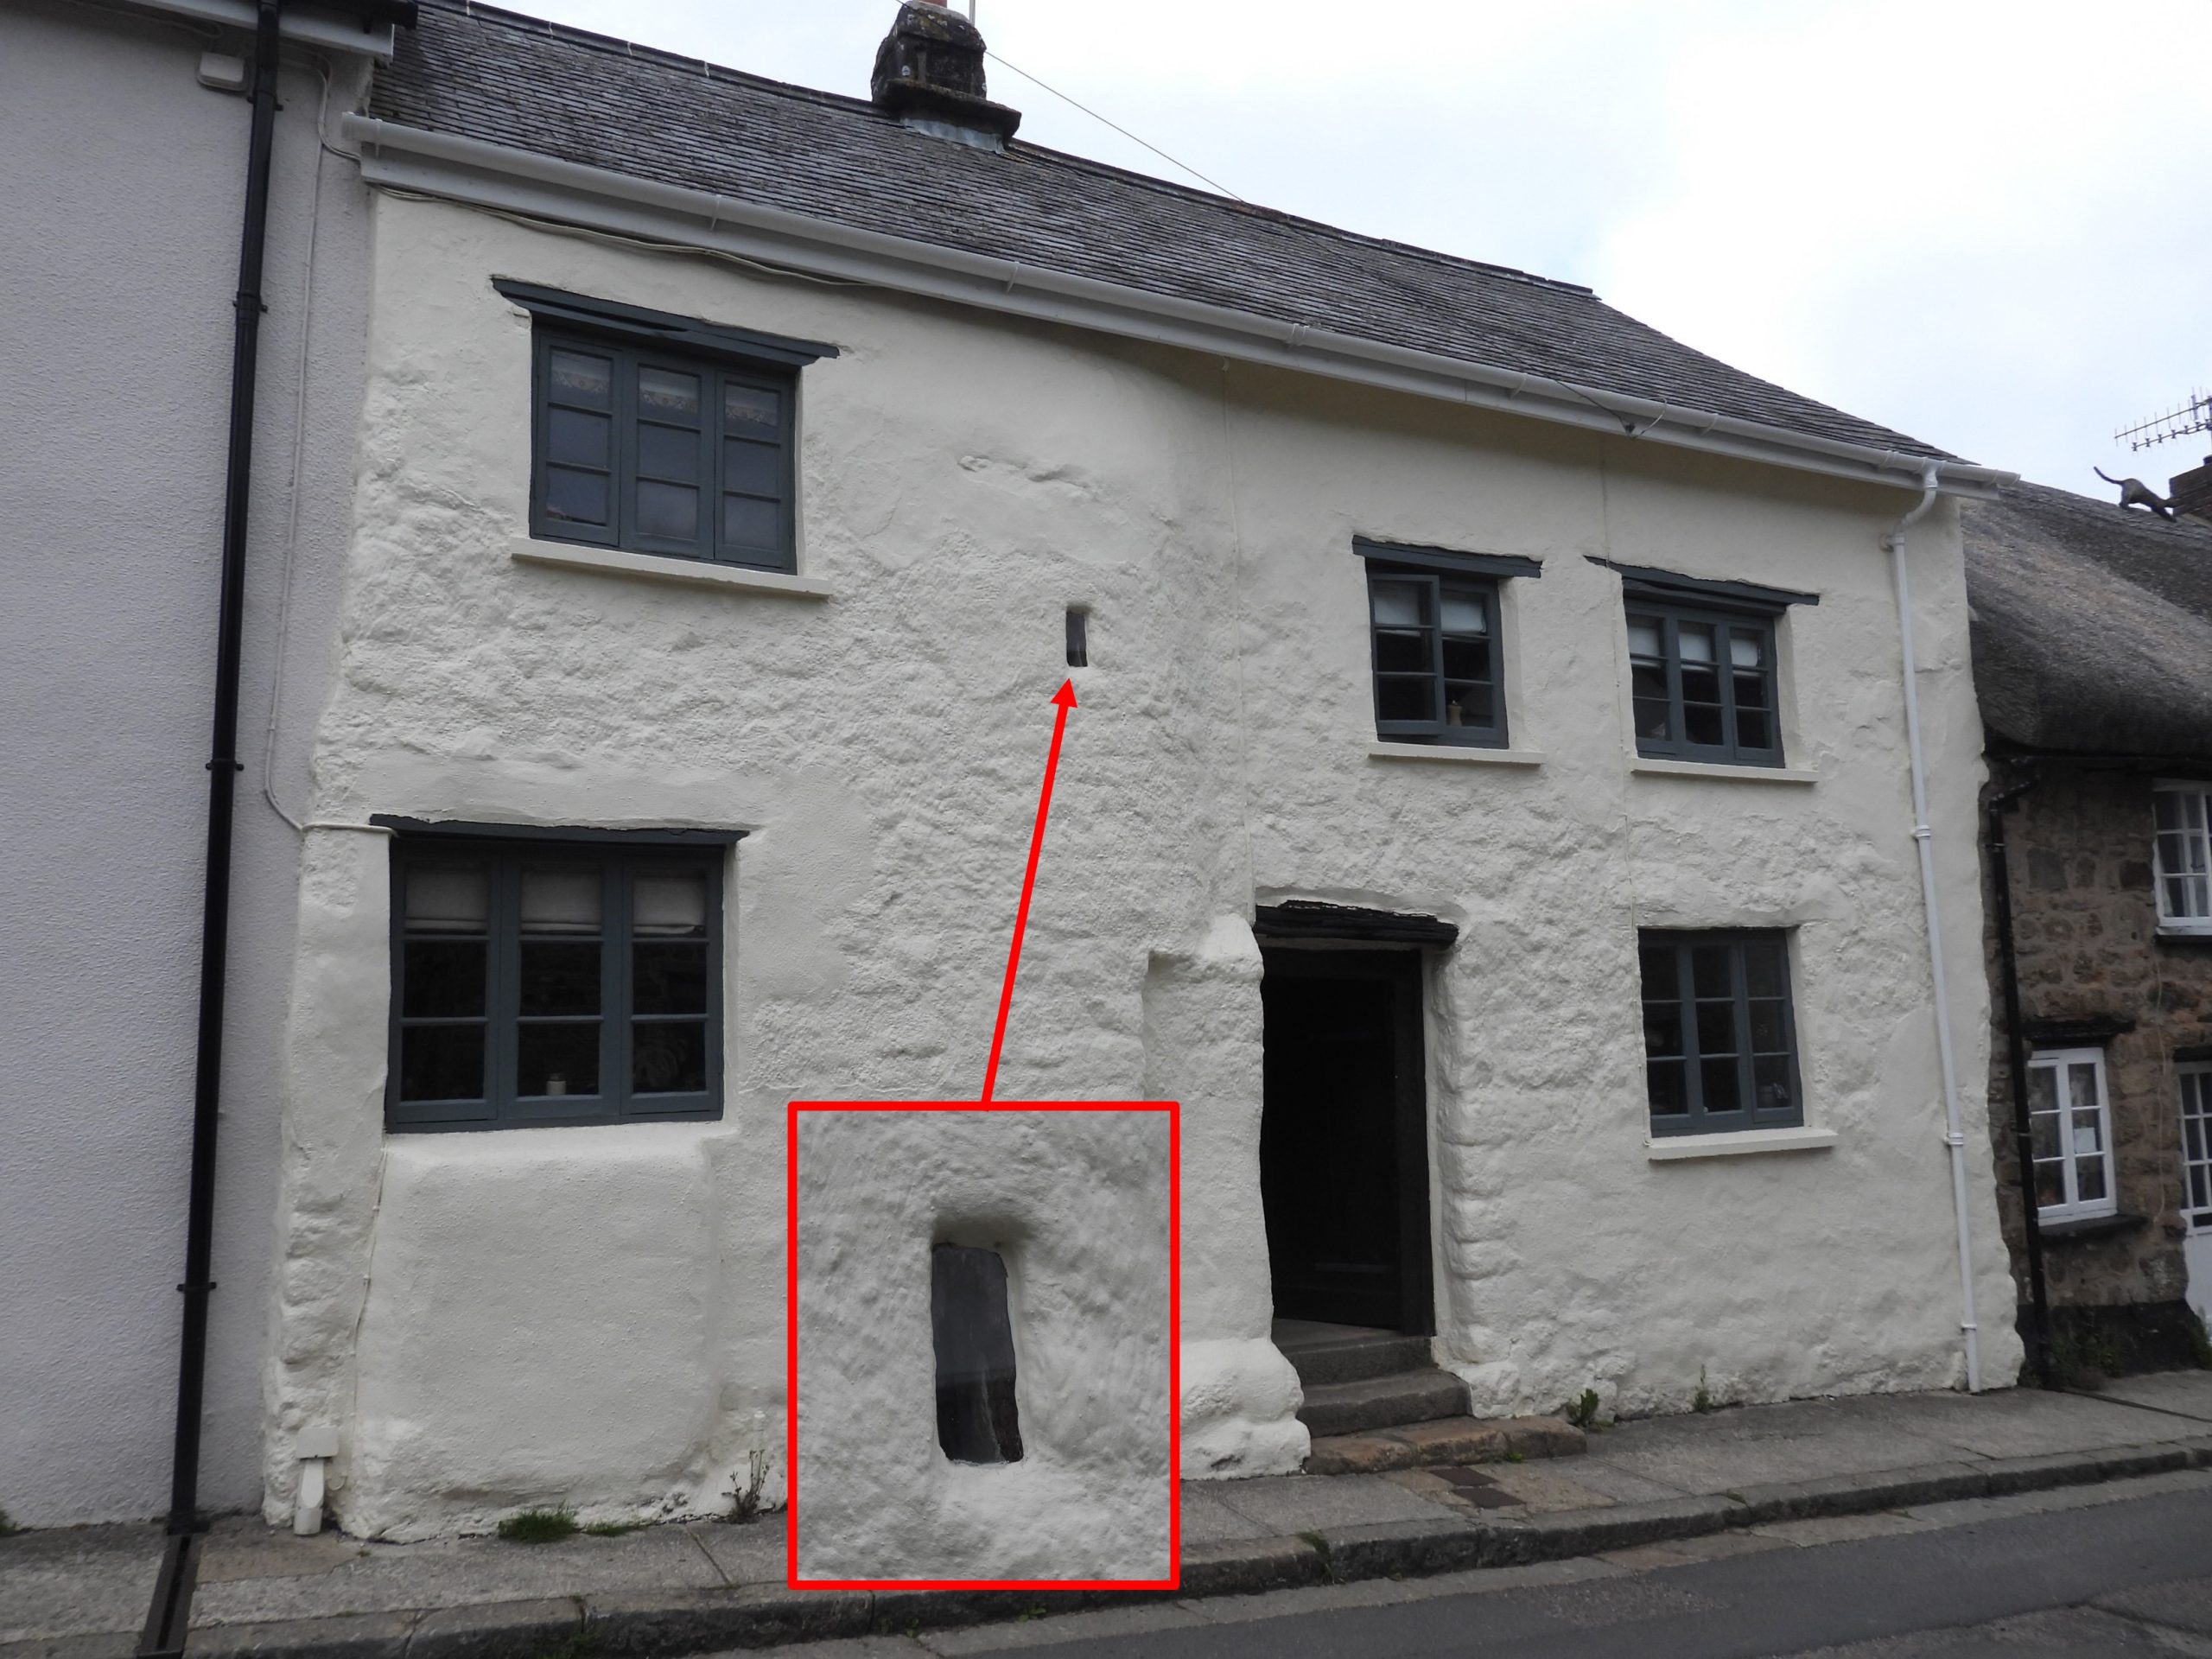 Chagford 51 - 6 and 8 Lower Street